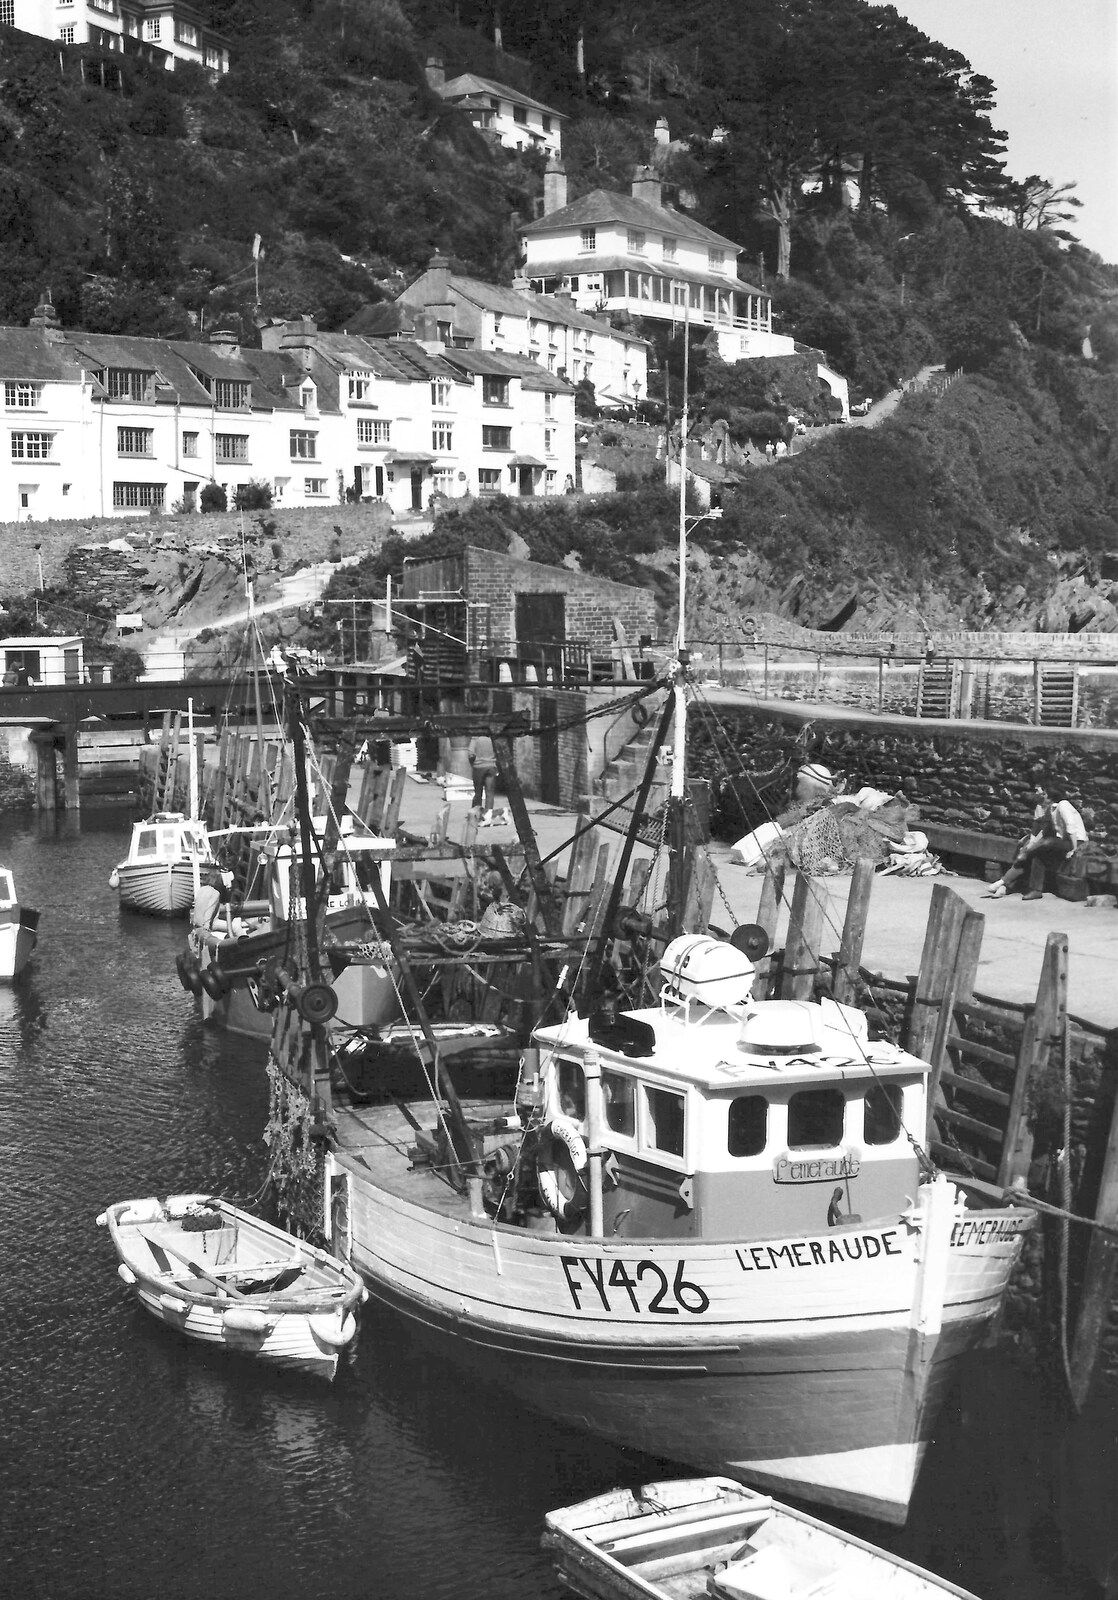 A Fowey-registered boat in Polperro harbour from Uni: The Last Day of Term, Plymouth Polytechnic, Devon - 2nd June 1987